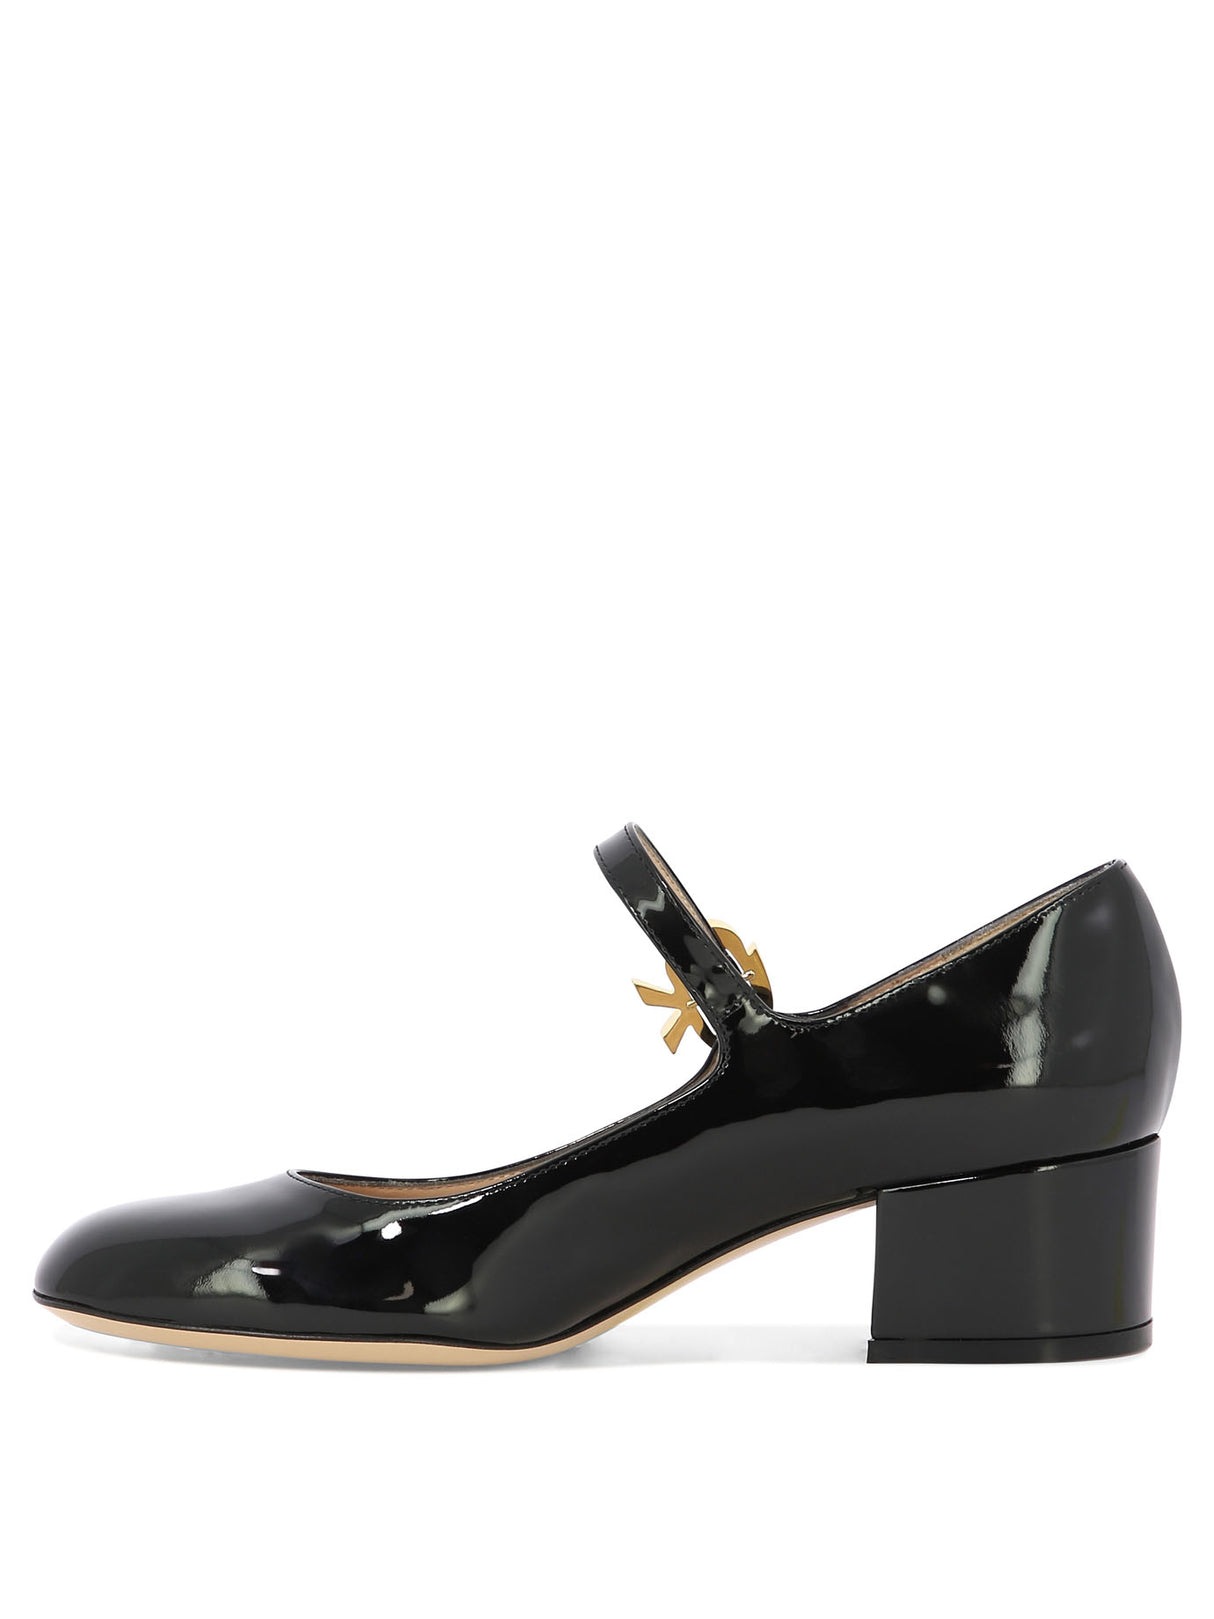 GIANVITO ROSSI Stylish Black Mary Janes with Ribbon Buckle and Block Heel